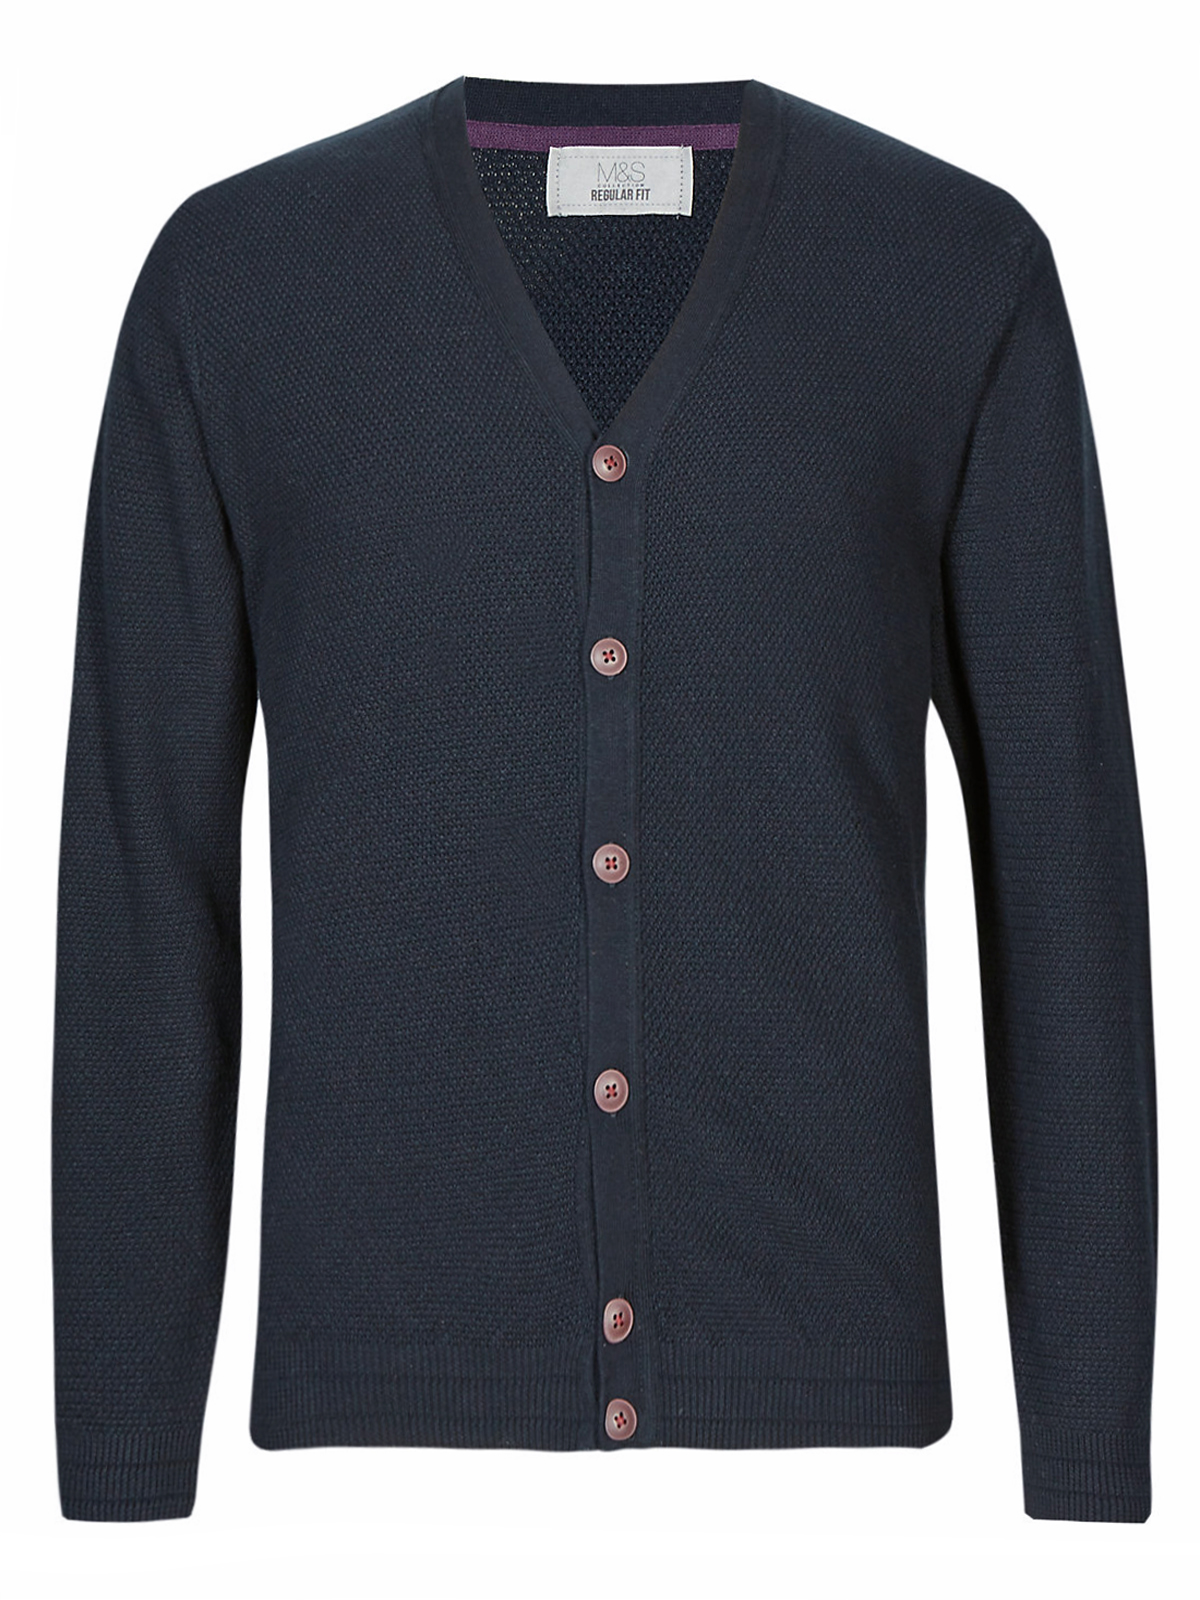 Marks and Spencer - - M&5 Navy Pure Cotton Piqué Textured Cardigan ...